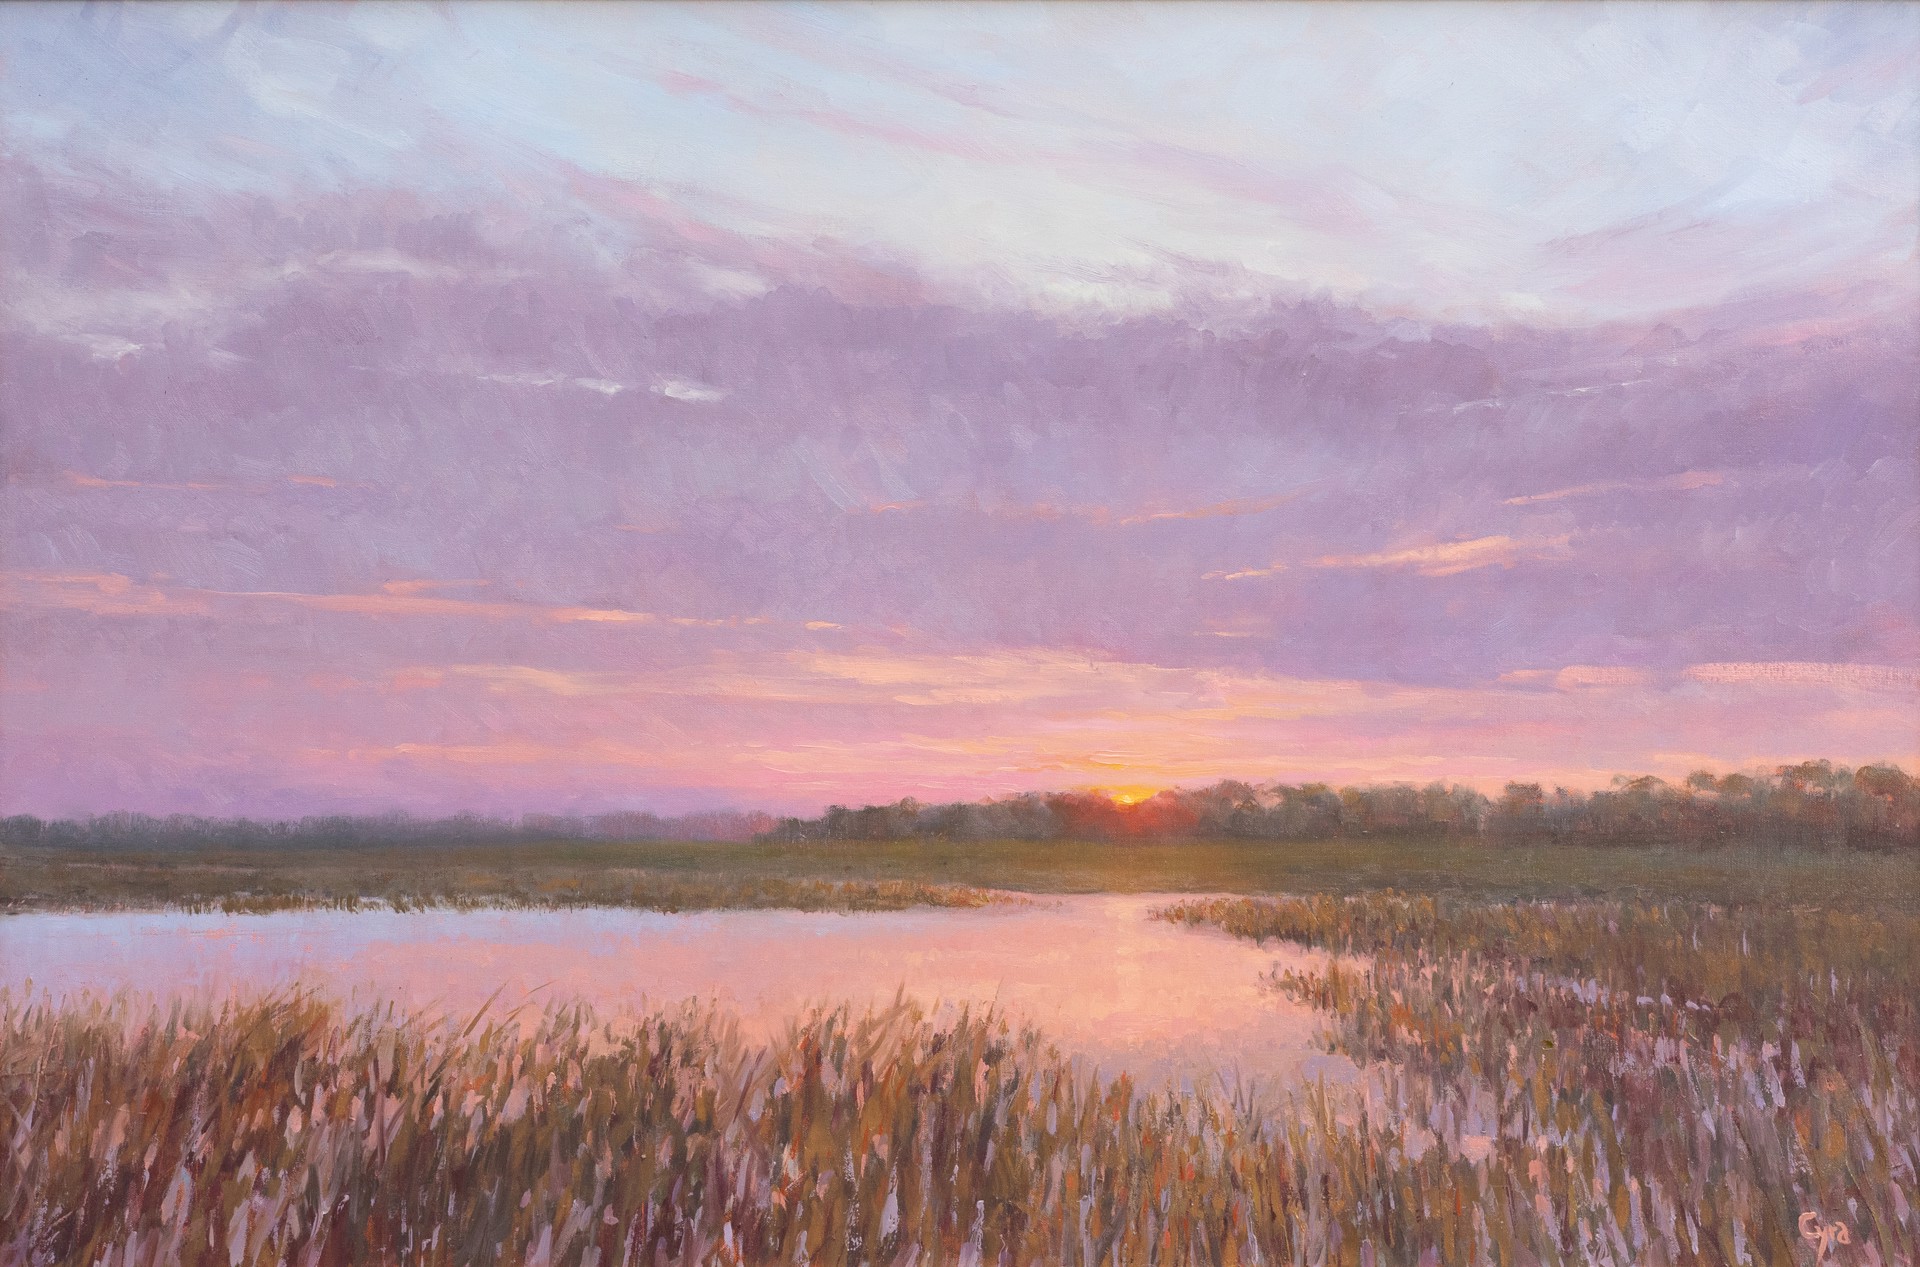 Between the Reeds by Michael Cyra